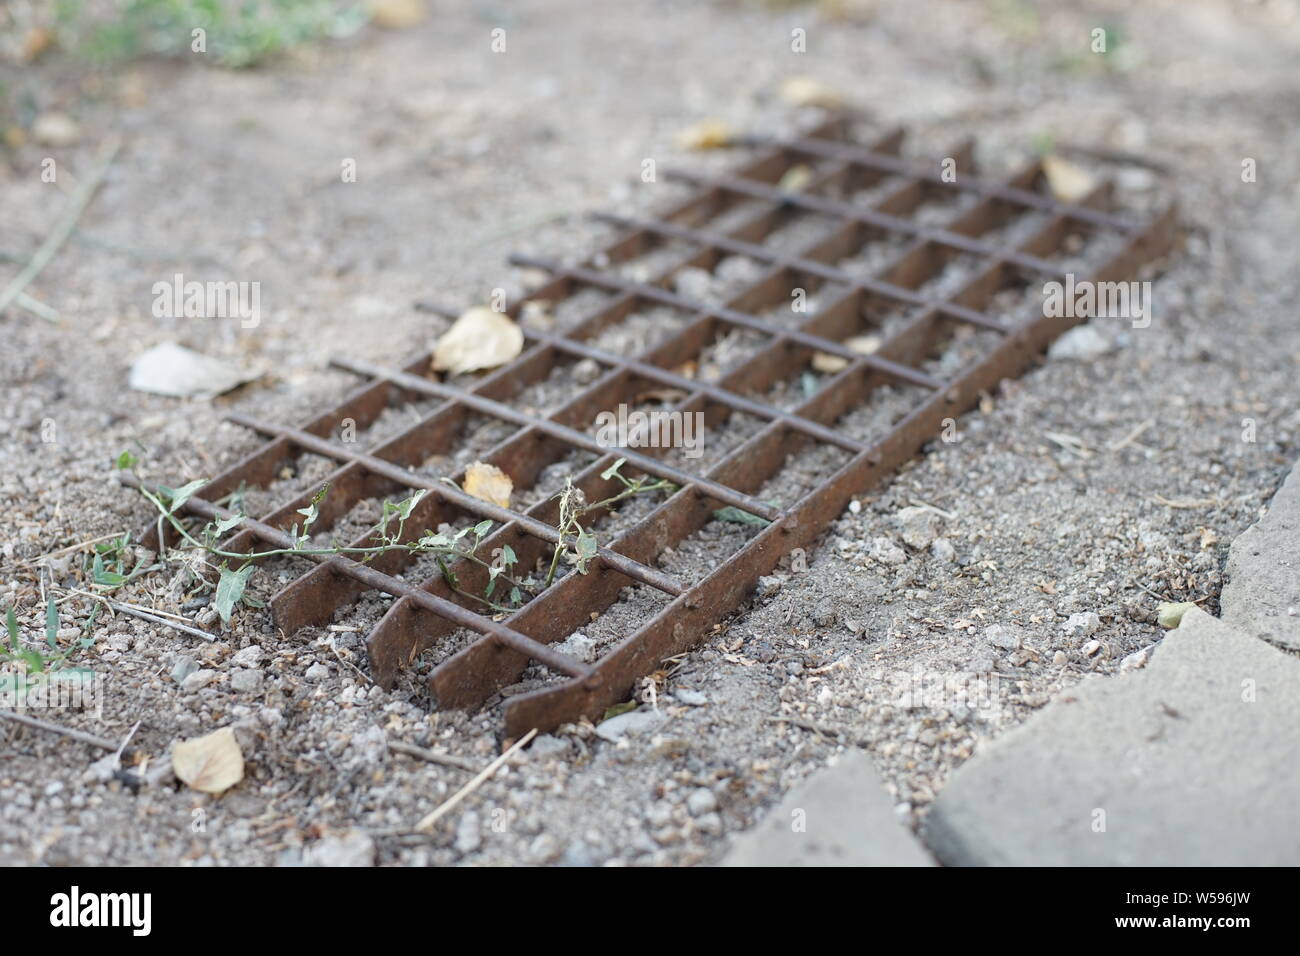 Old metal shoe shine grate lay on the ground in the garden close up Stock Photo